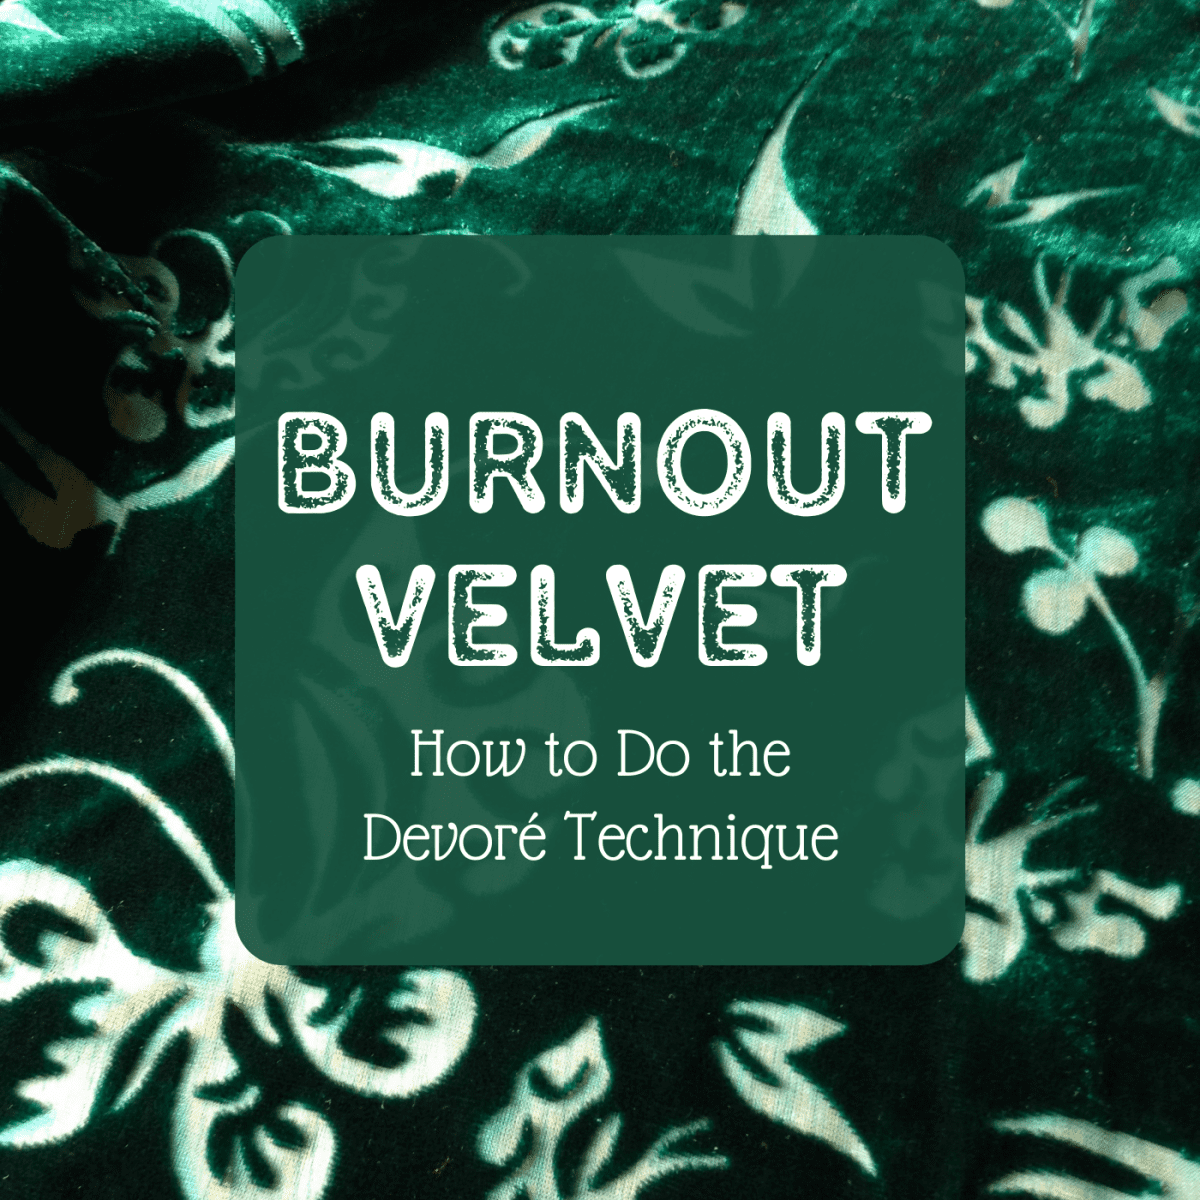 How to Make a Burnout Tee